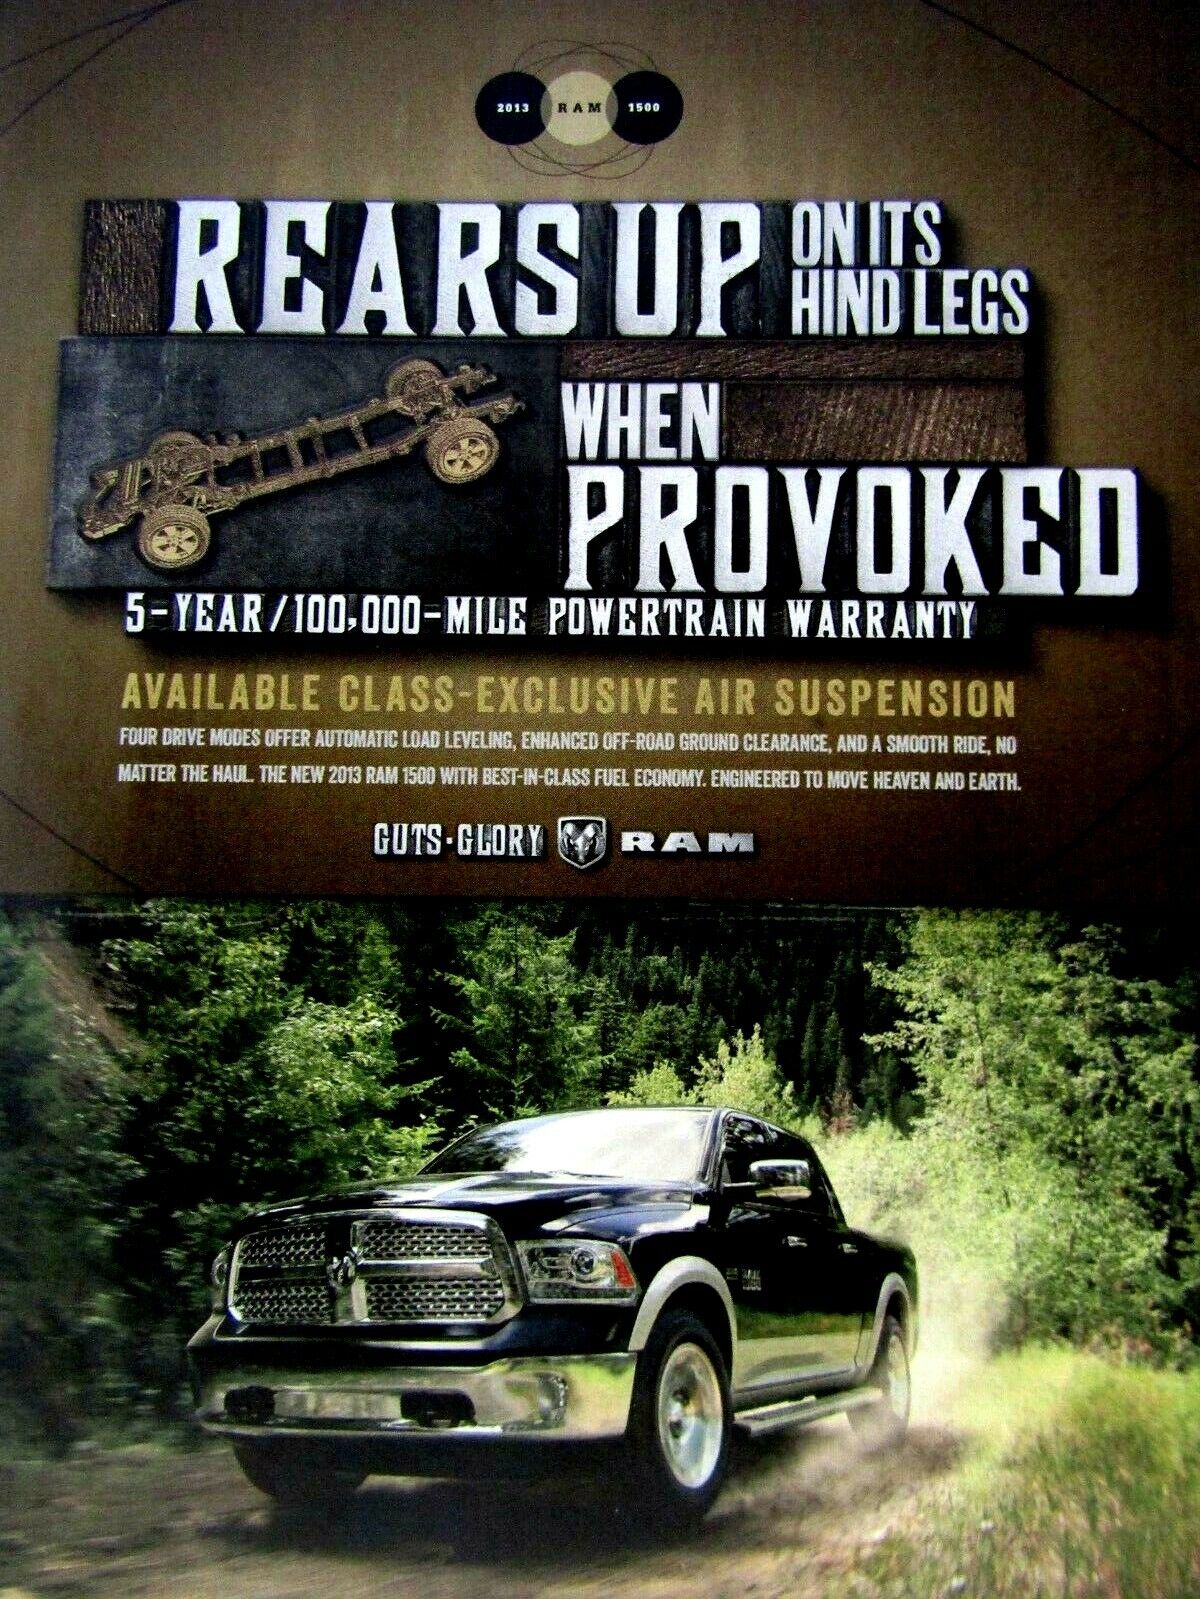 2013 Dodge Ram Rears Up On Hind Legs When Provoked Original Print Ad 8.5 x 11\